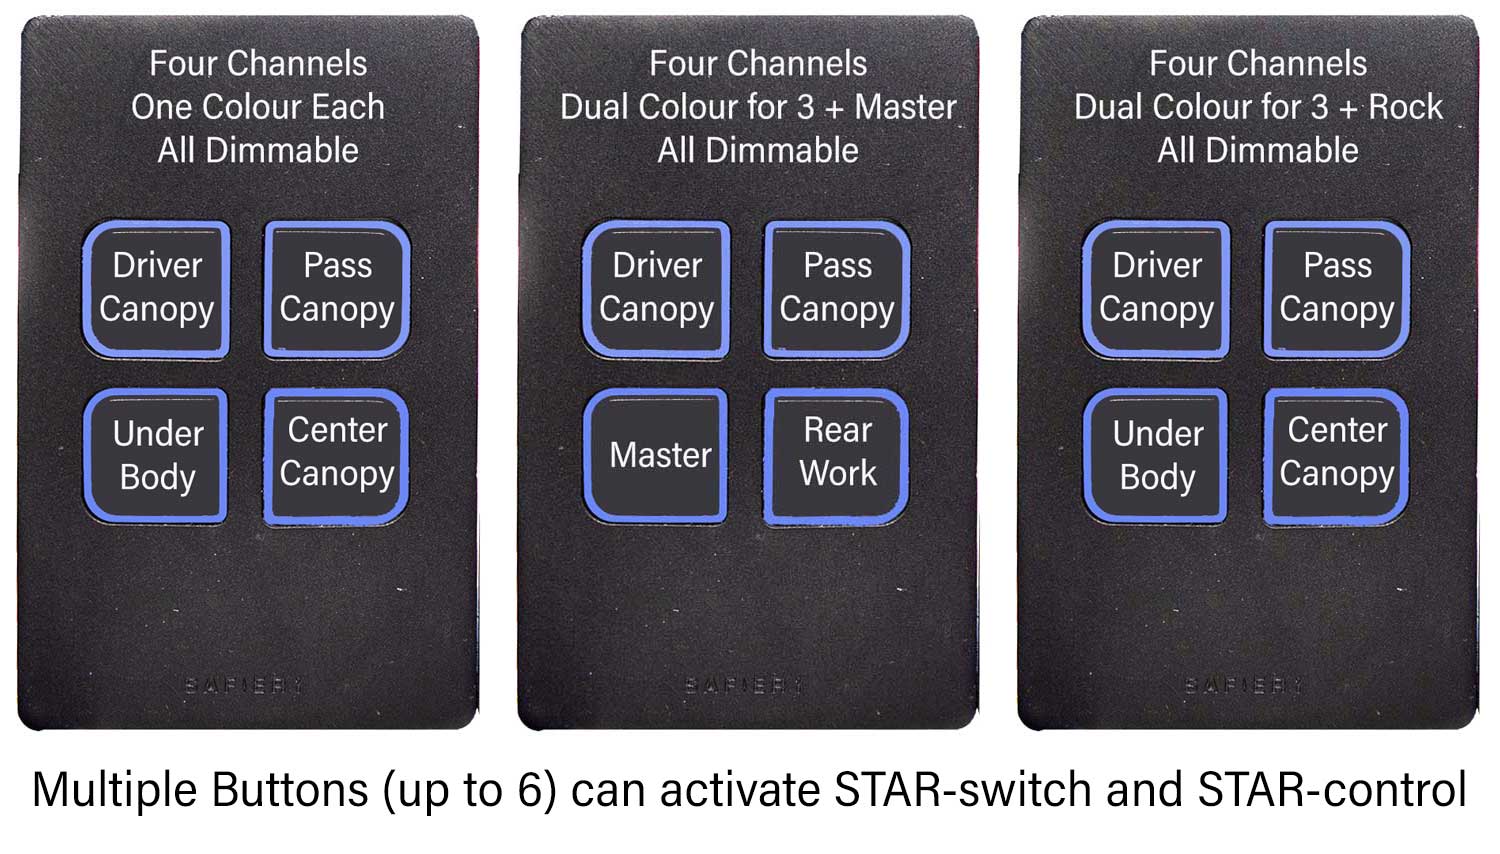 STAR-switch can be in multples up to 6